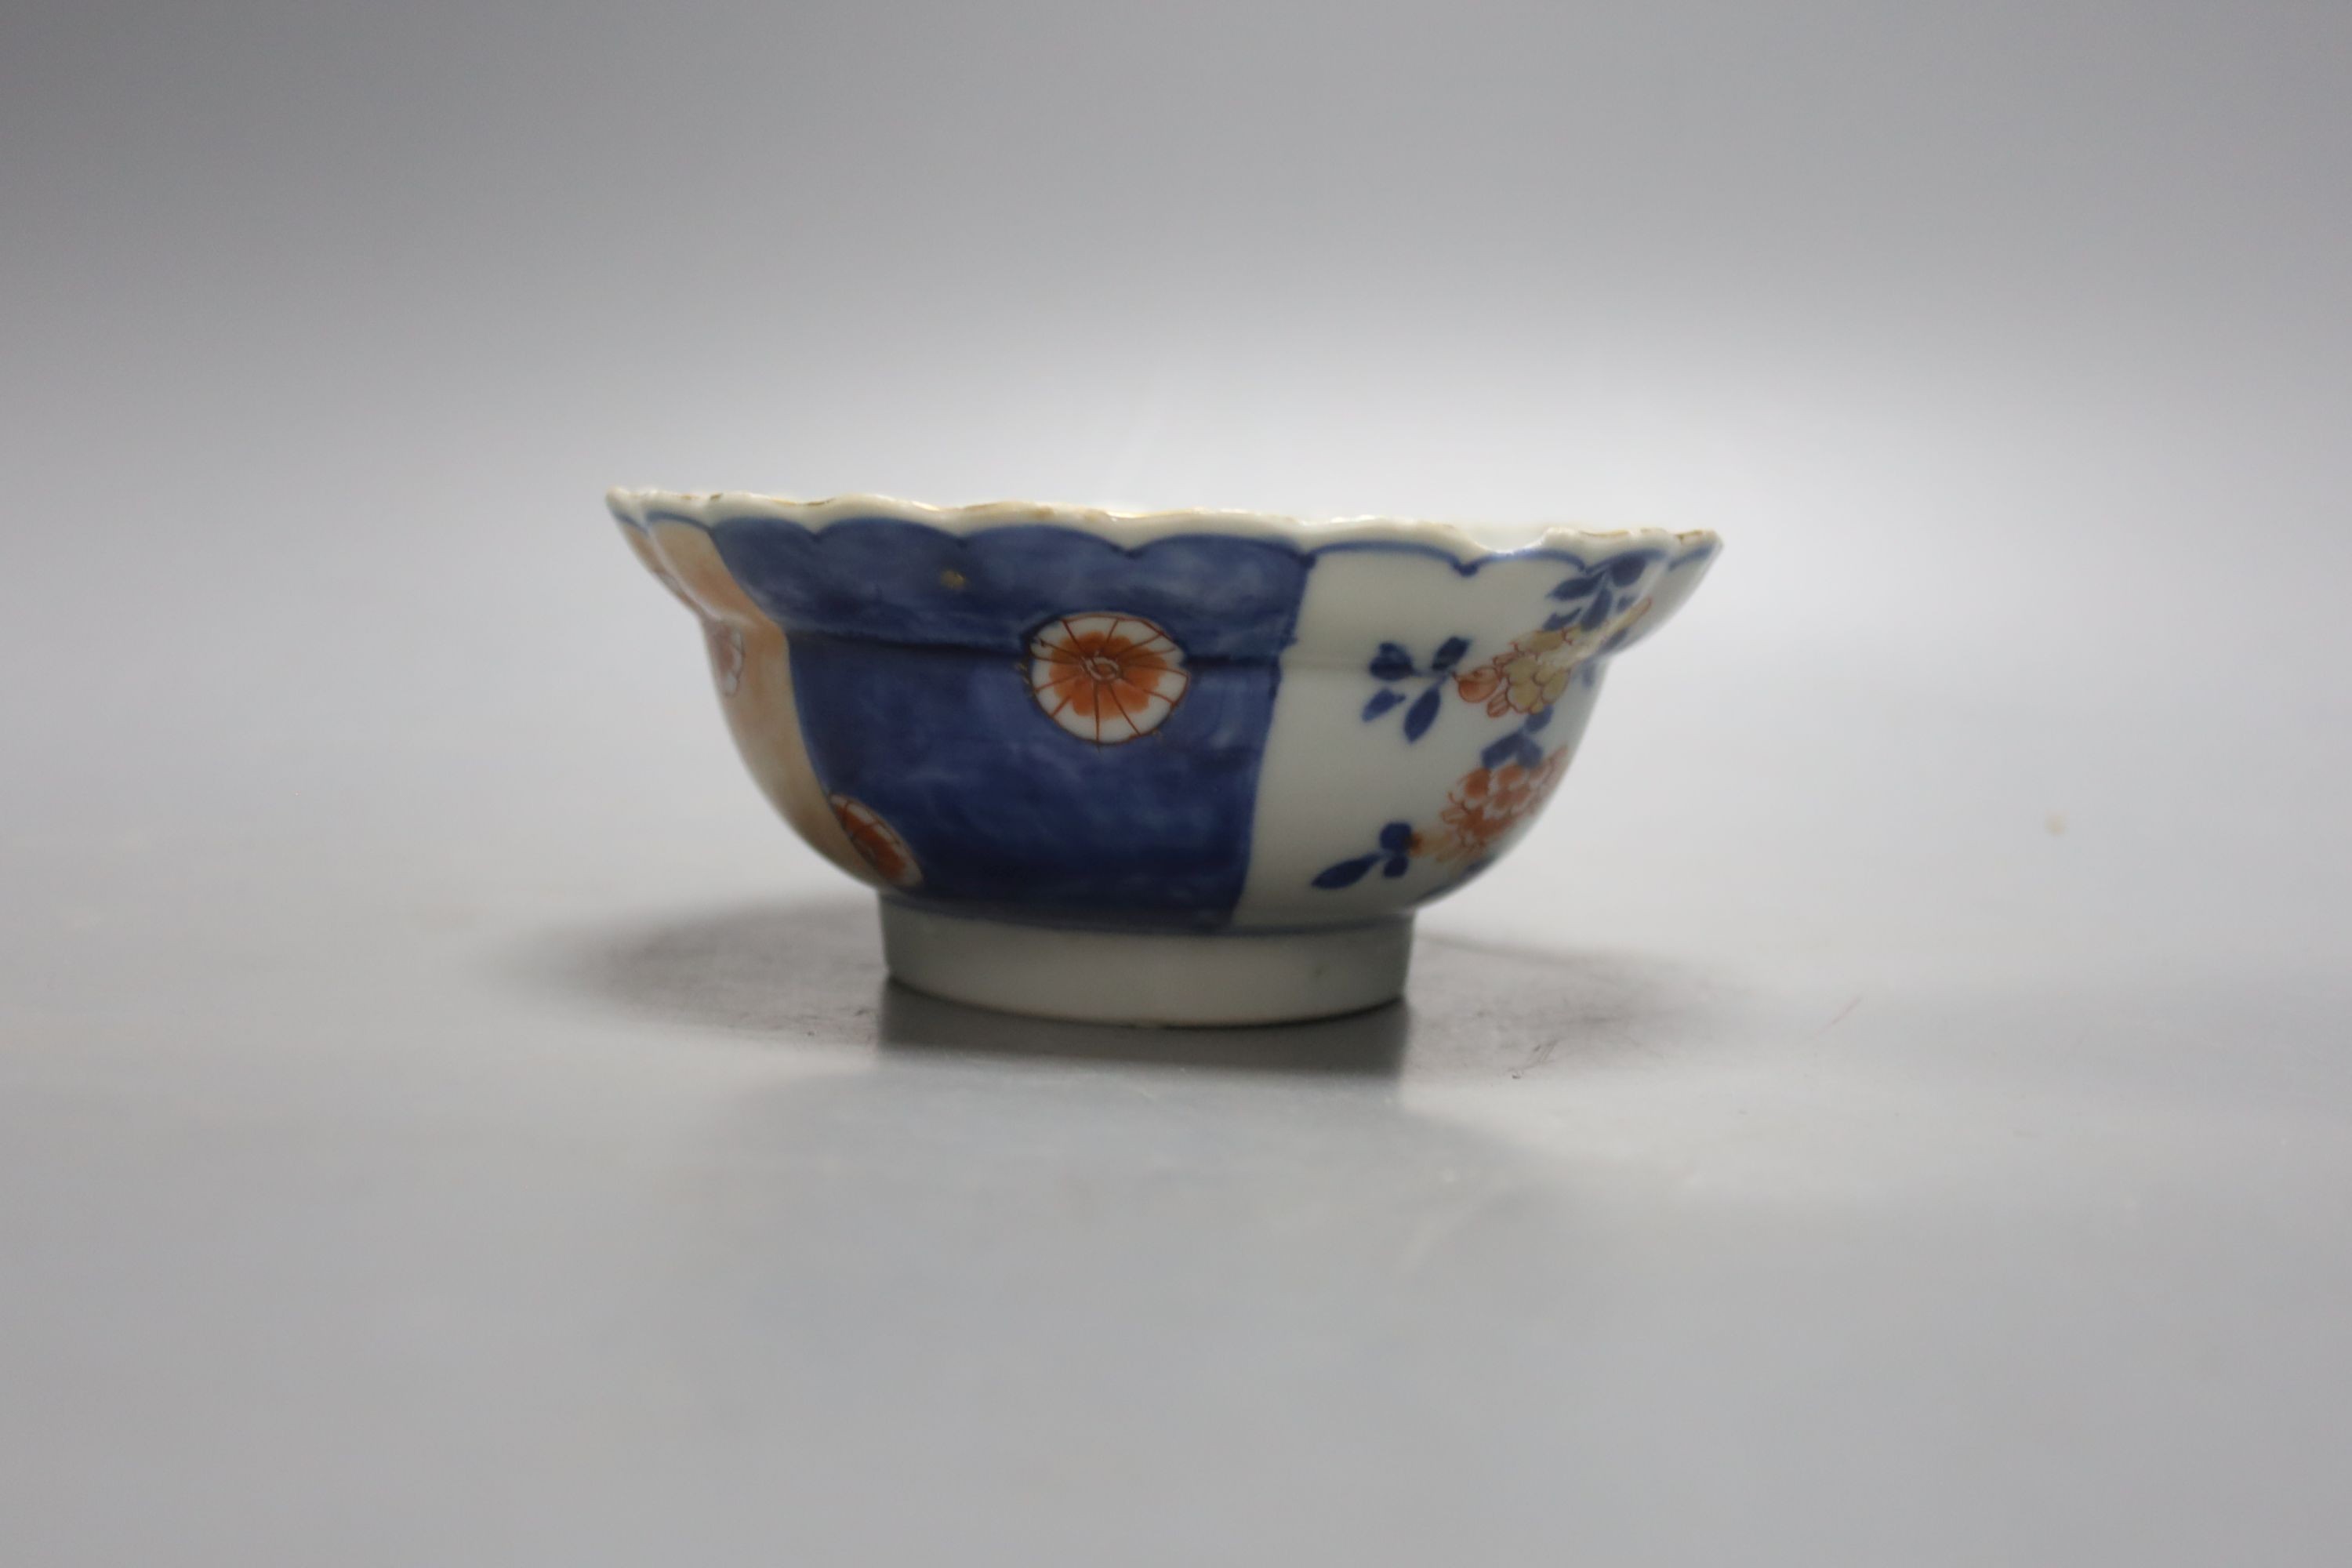 Two 18th century Chinese dishes and a bowl (3) 16.5cm